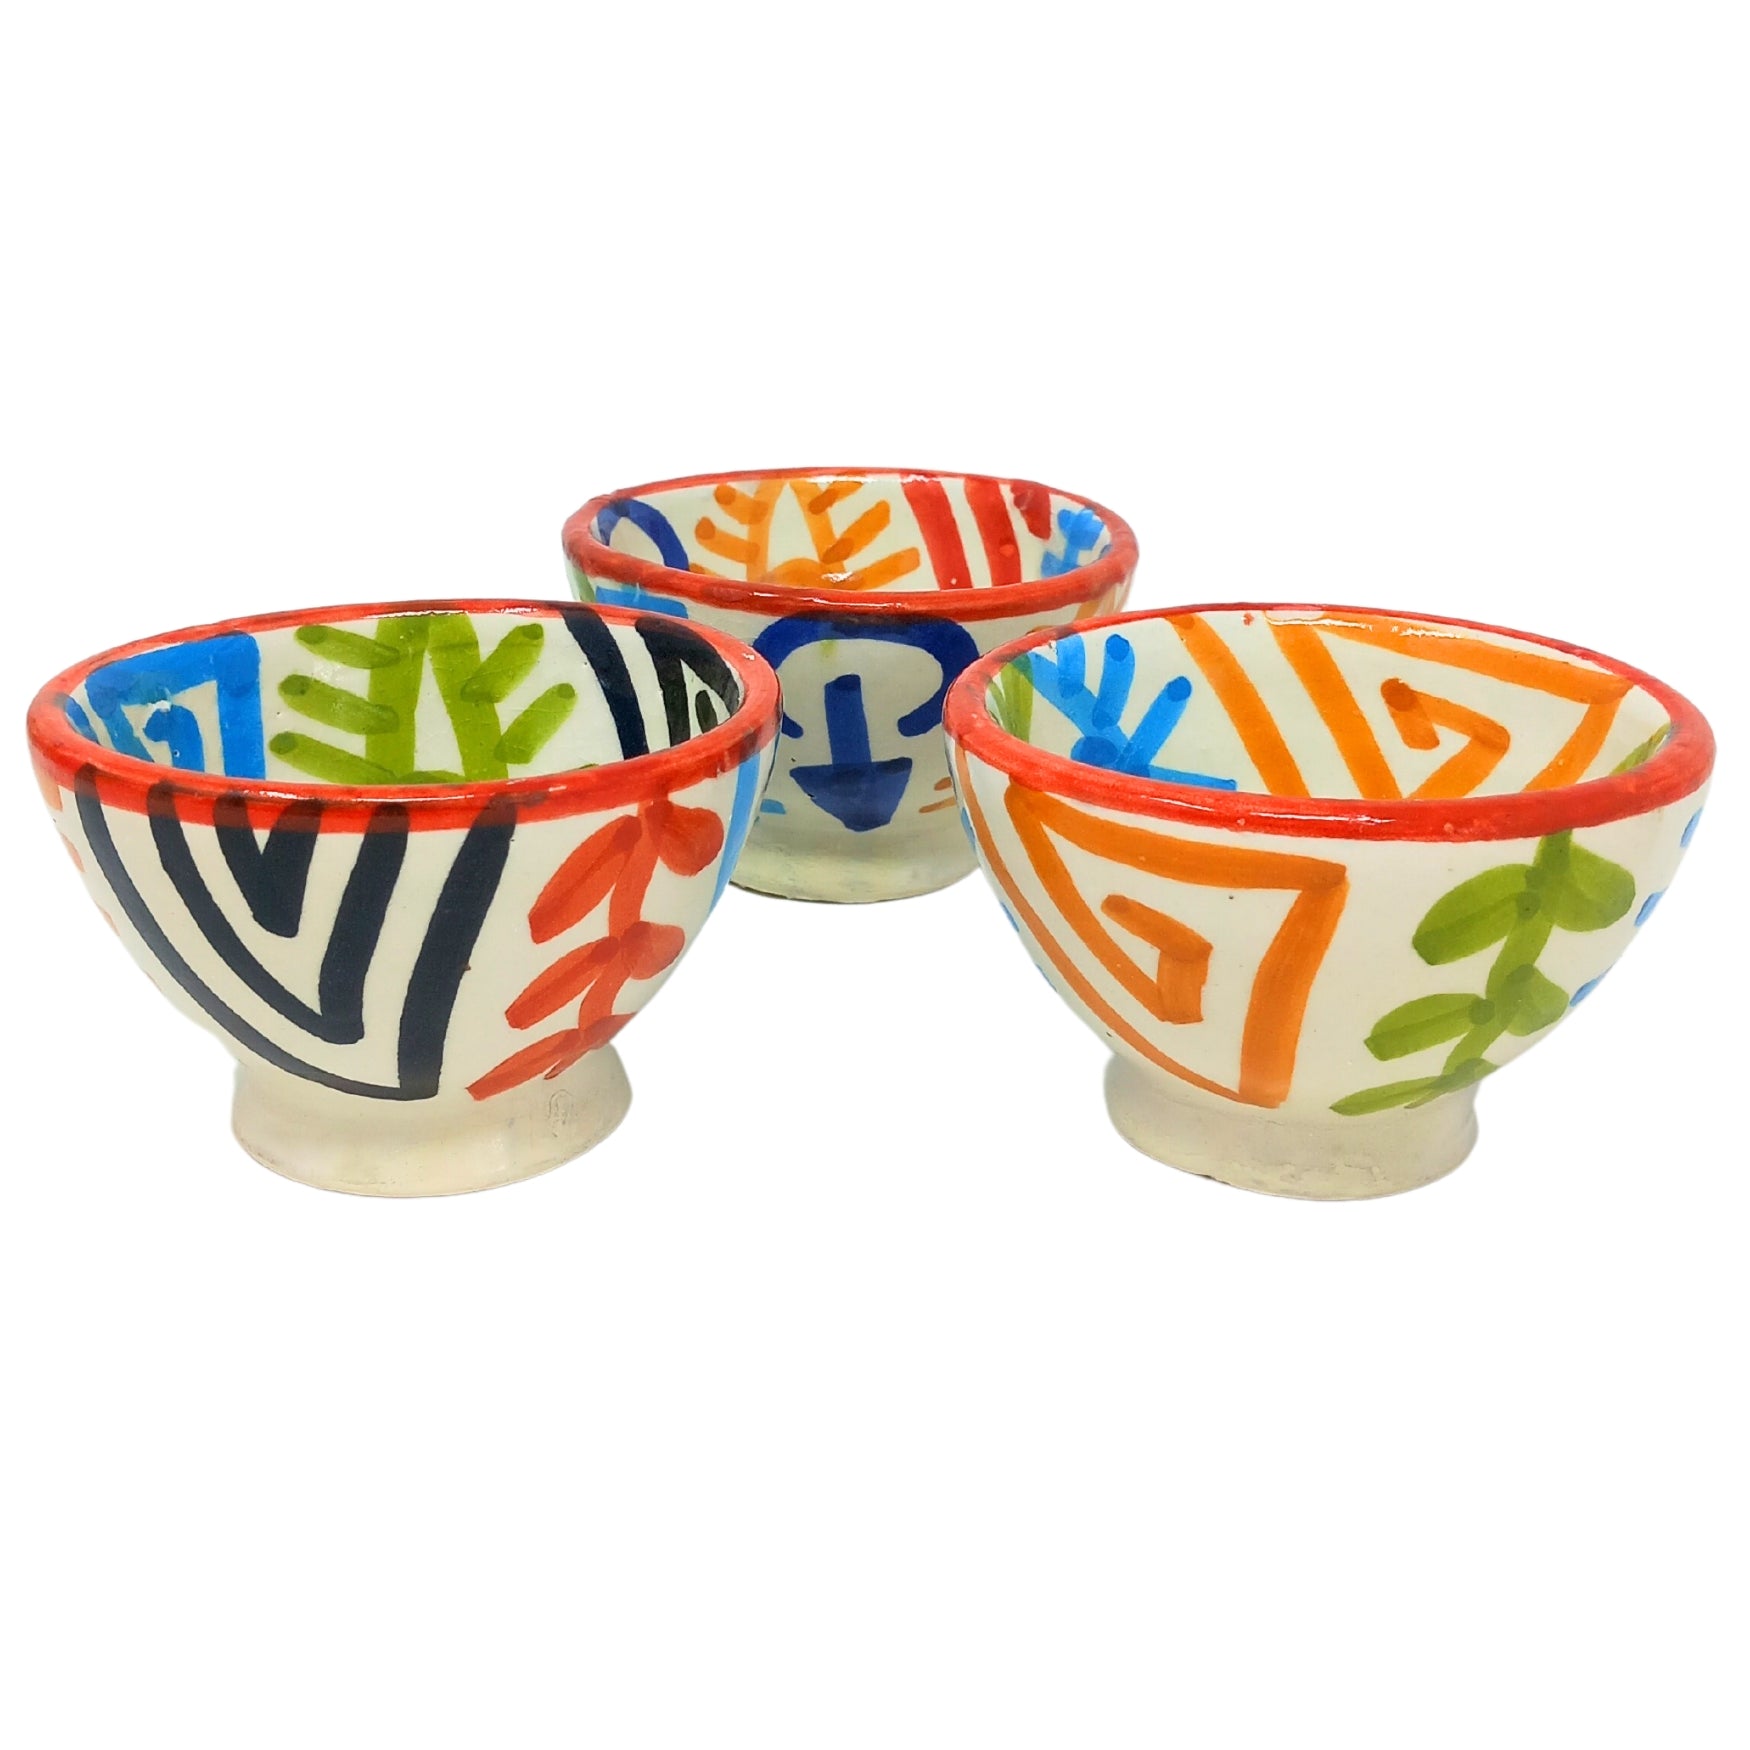 picture of handcrafted Moroccan ceramic bowl with a colourful artistic hand painted pattern